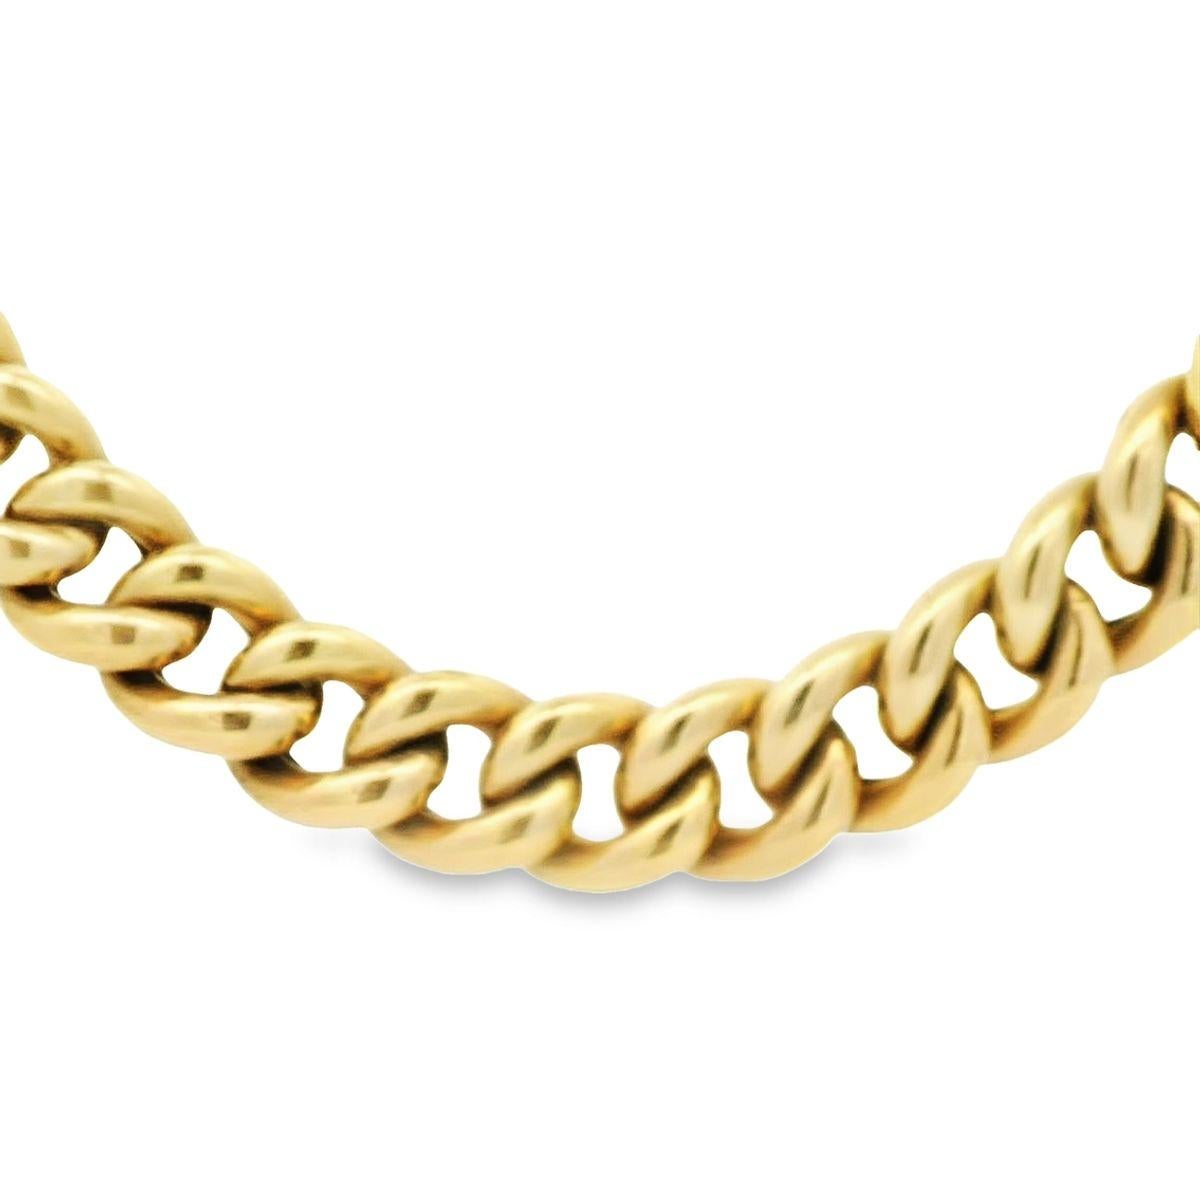 The essence of timeless design is represented here and offered by Alex & Co. Crafted in 14 karat yellow gold this 18 inch curb link necklace is effortlessly polished and nonchalant. This very flexible piece is Italian made weighing 63.96 grams,